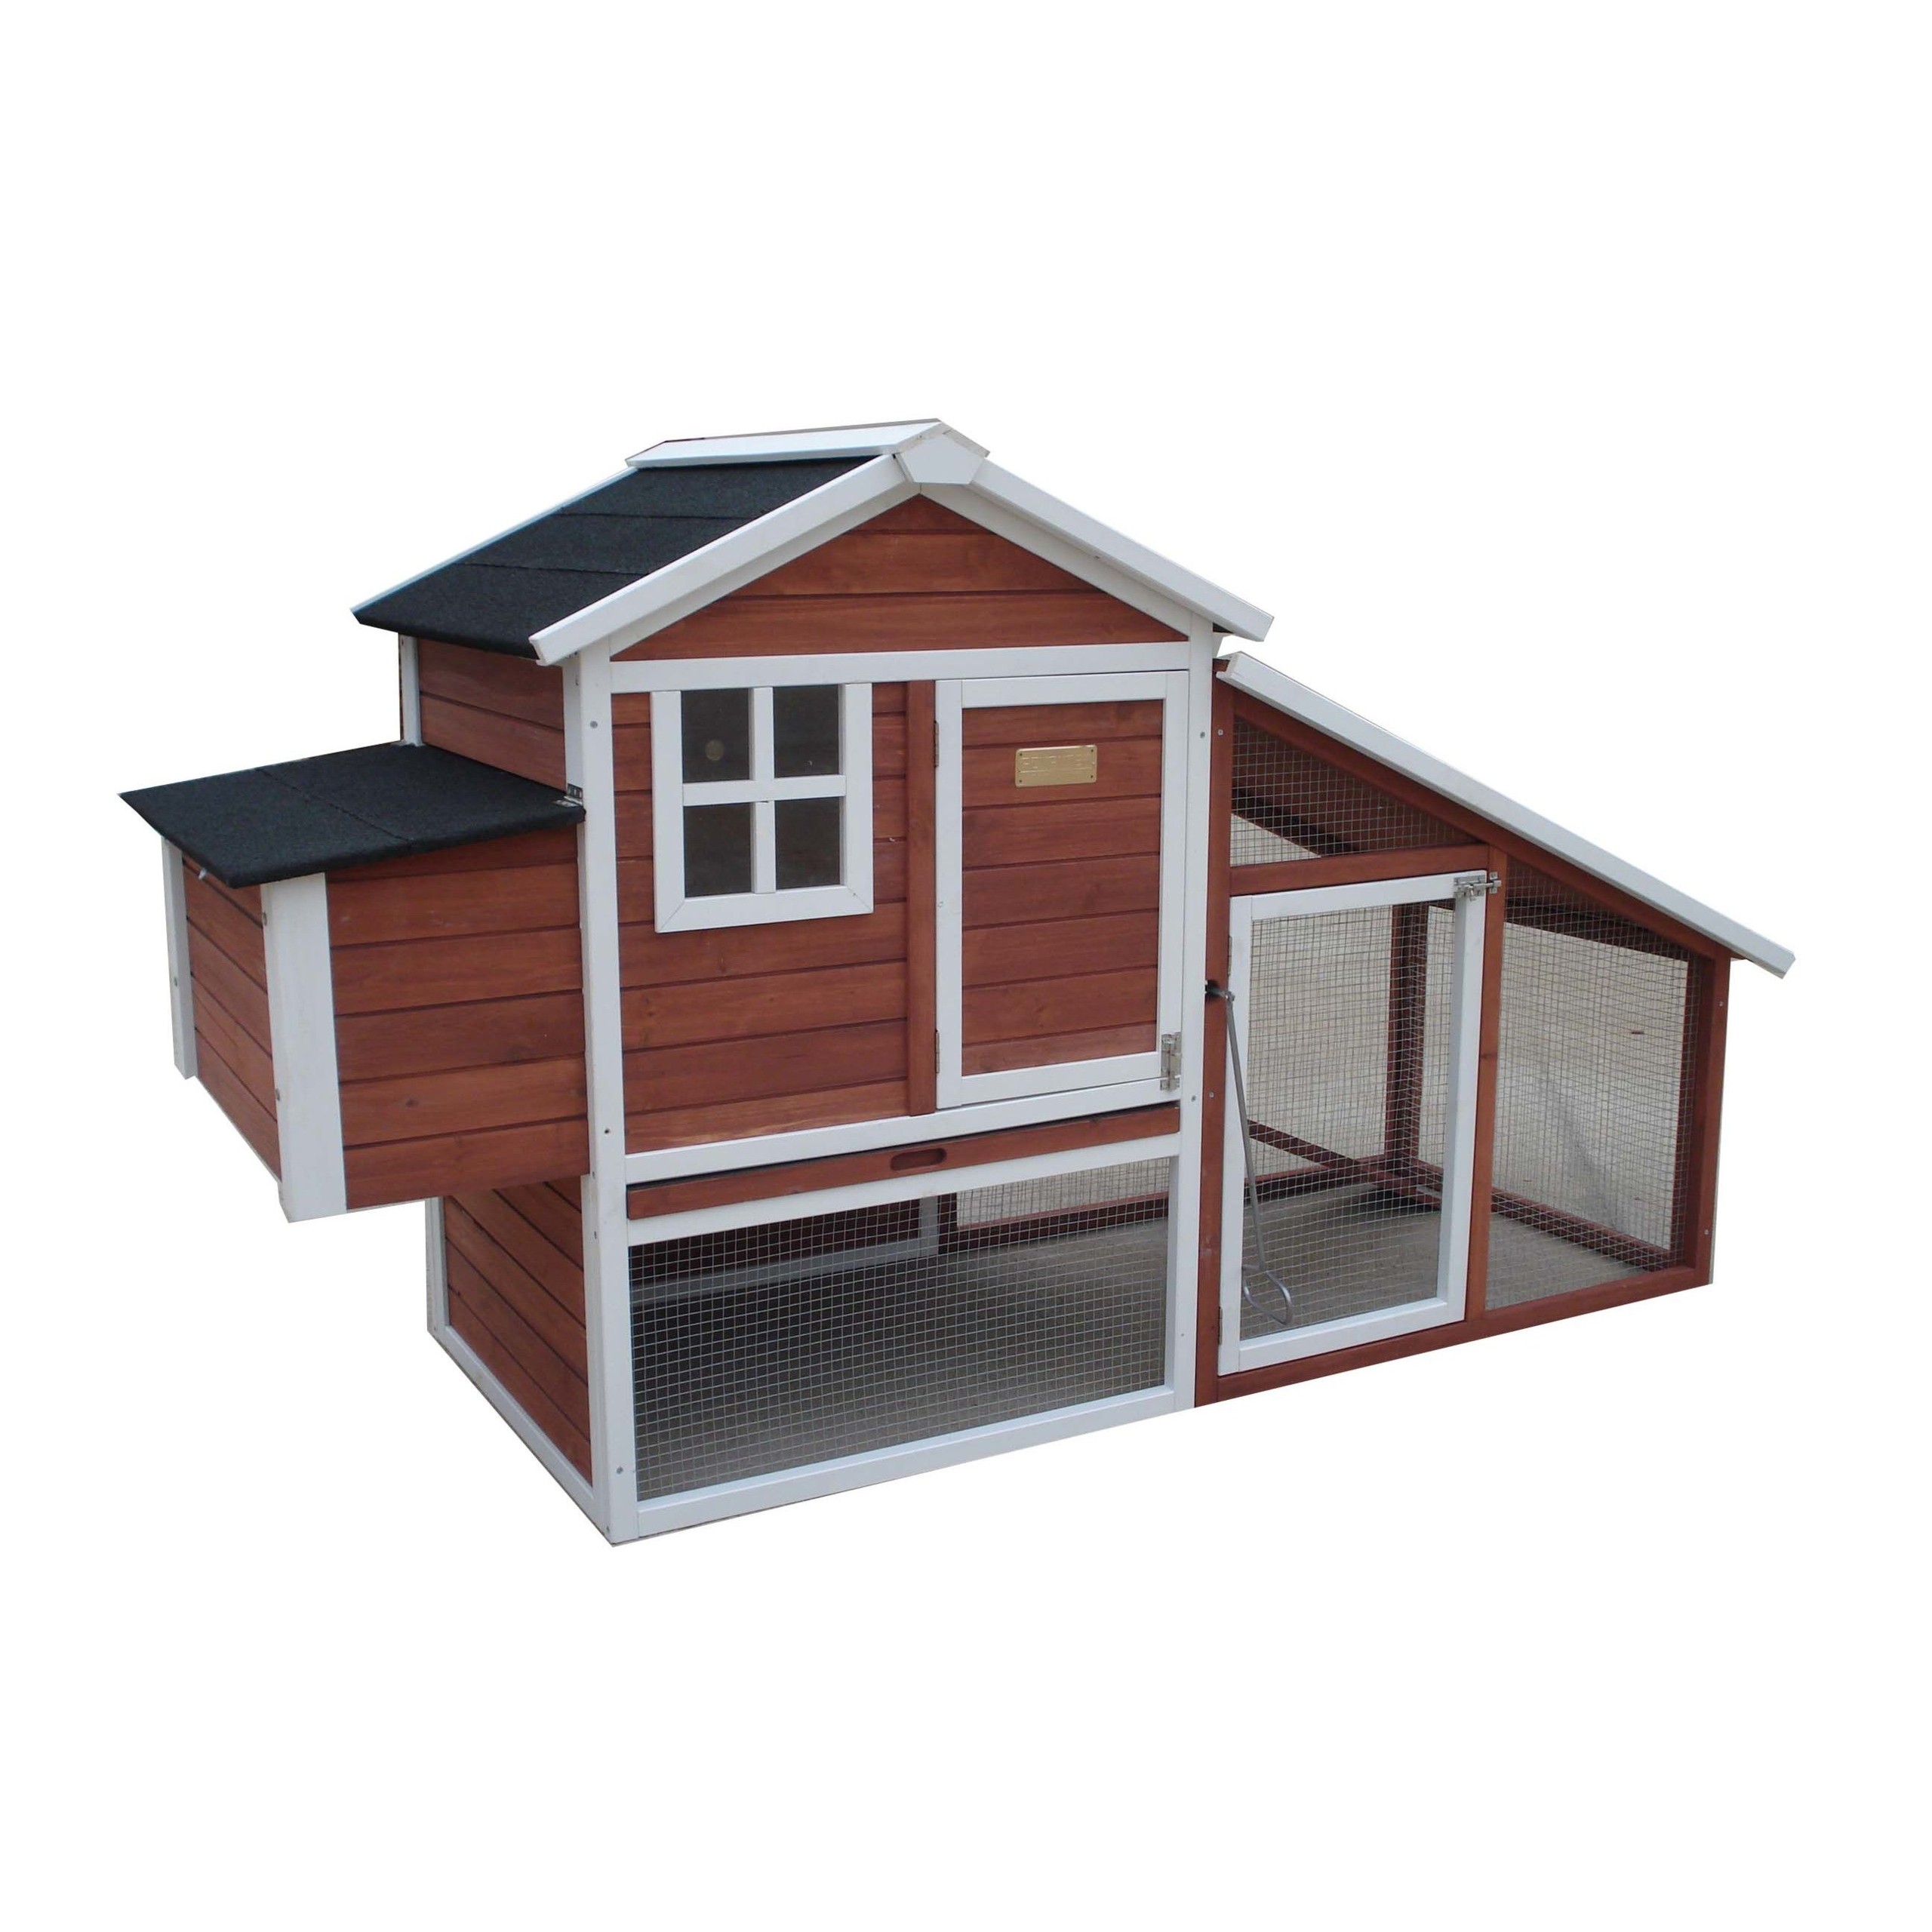 The Farm House Poultry Chicken Coop with Nesting Box